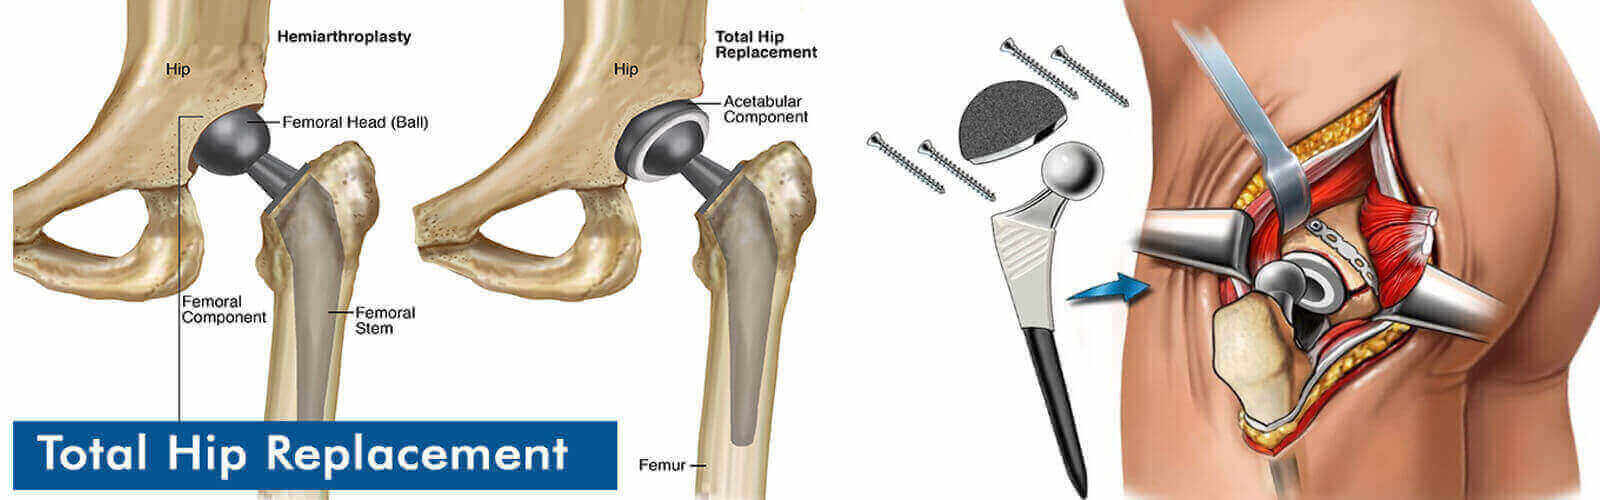 Hip Replacement Surgery Or Hip Resurfacing in Brazil